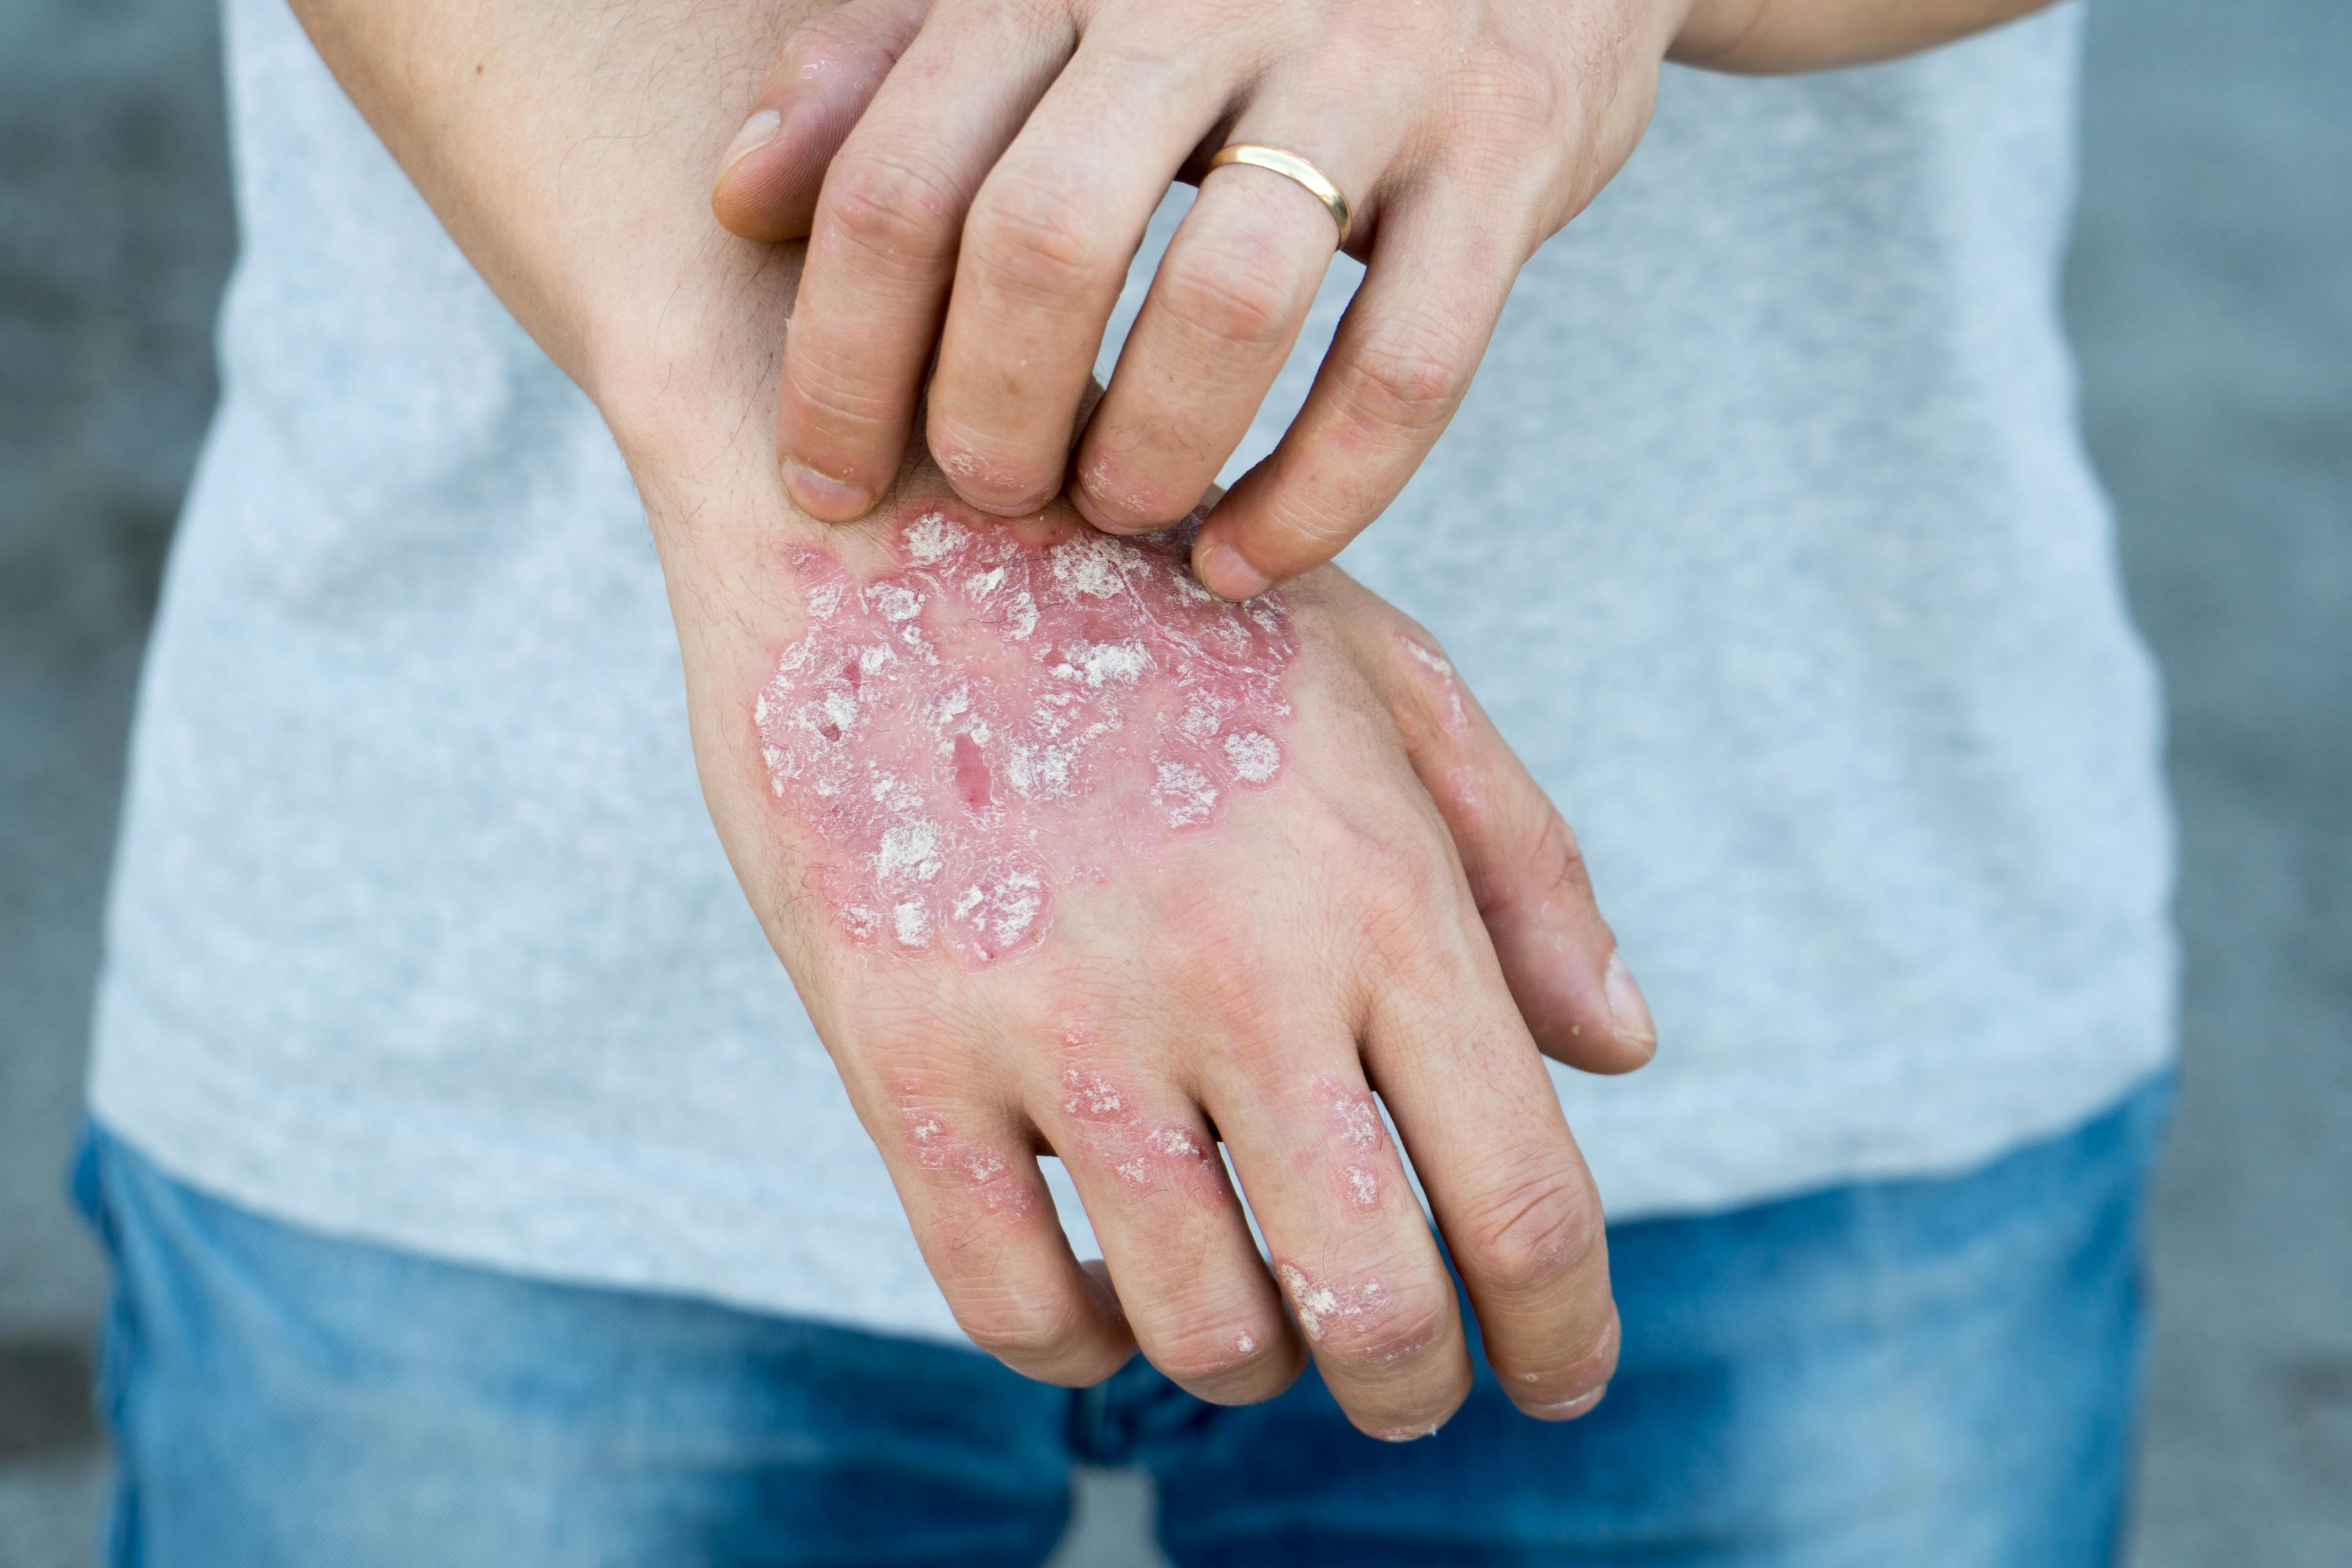 Phase 2 EDP1815 Data for Psoriasis Released